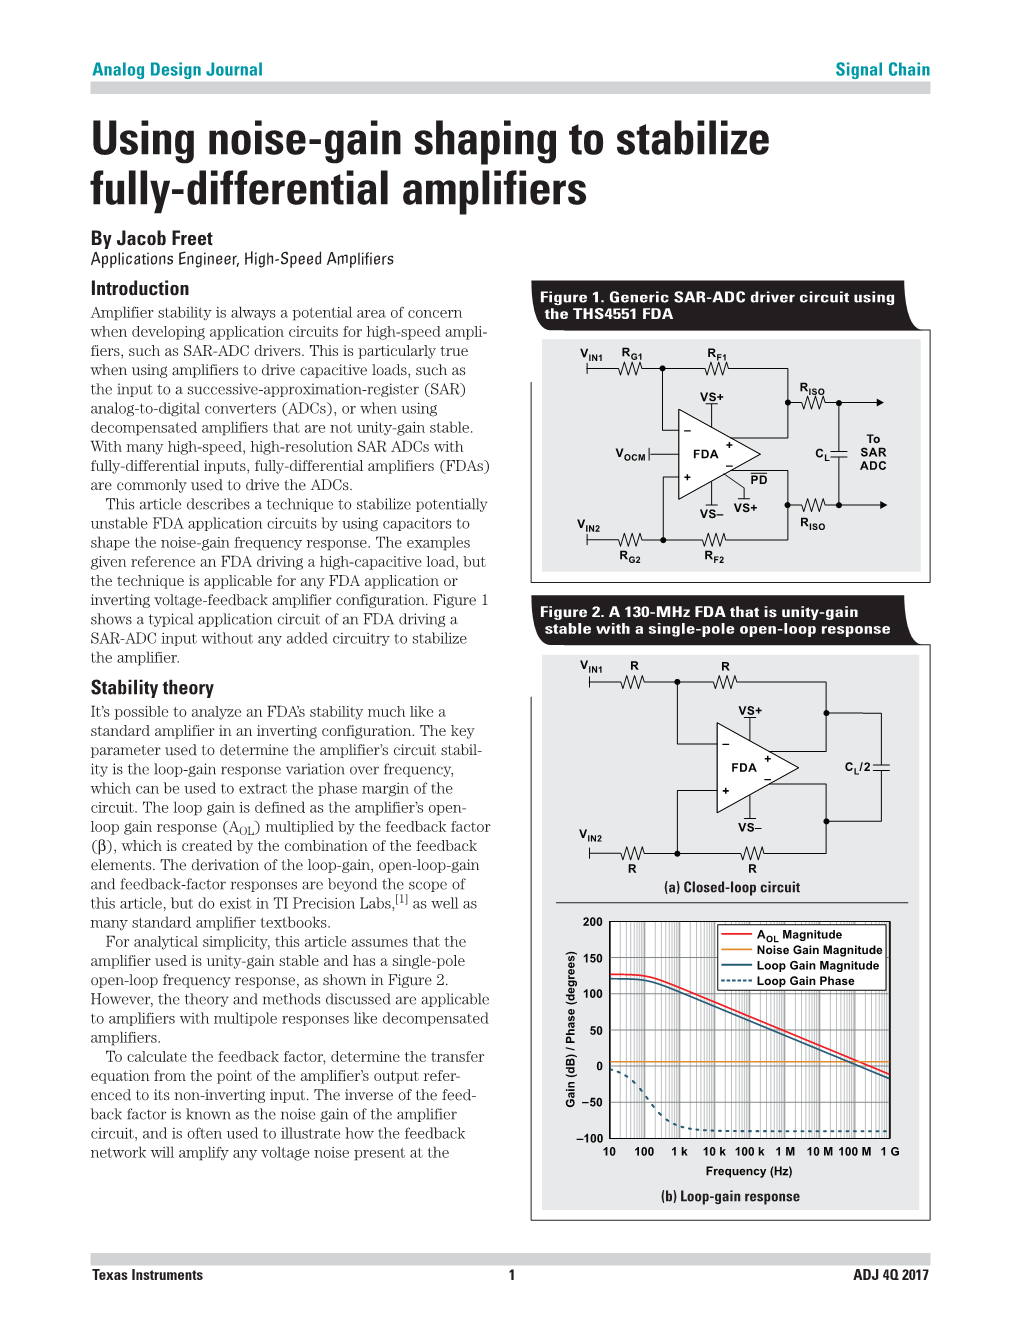 Using Noise-Gain Shaping to Stabilize Fully-Differential Amplifiers by Jacob Freet Applications Engineer, High-Speed Amplifiers